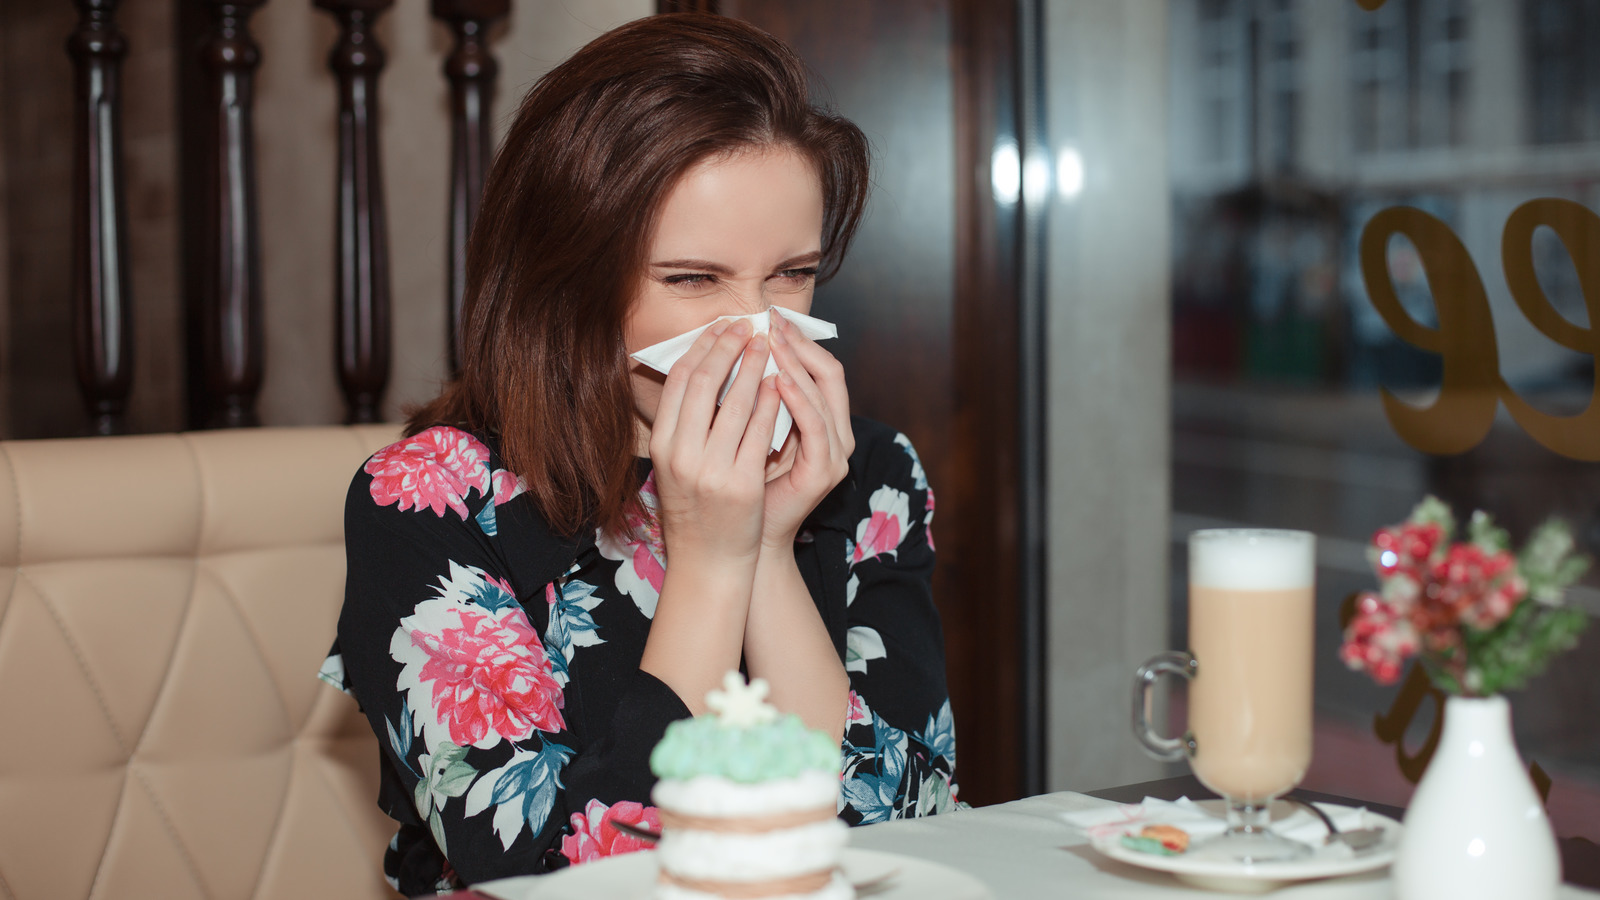 If You Get A Runny Nose While Eating, This Is Why